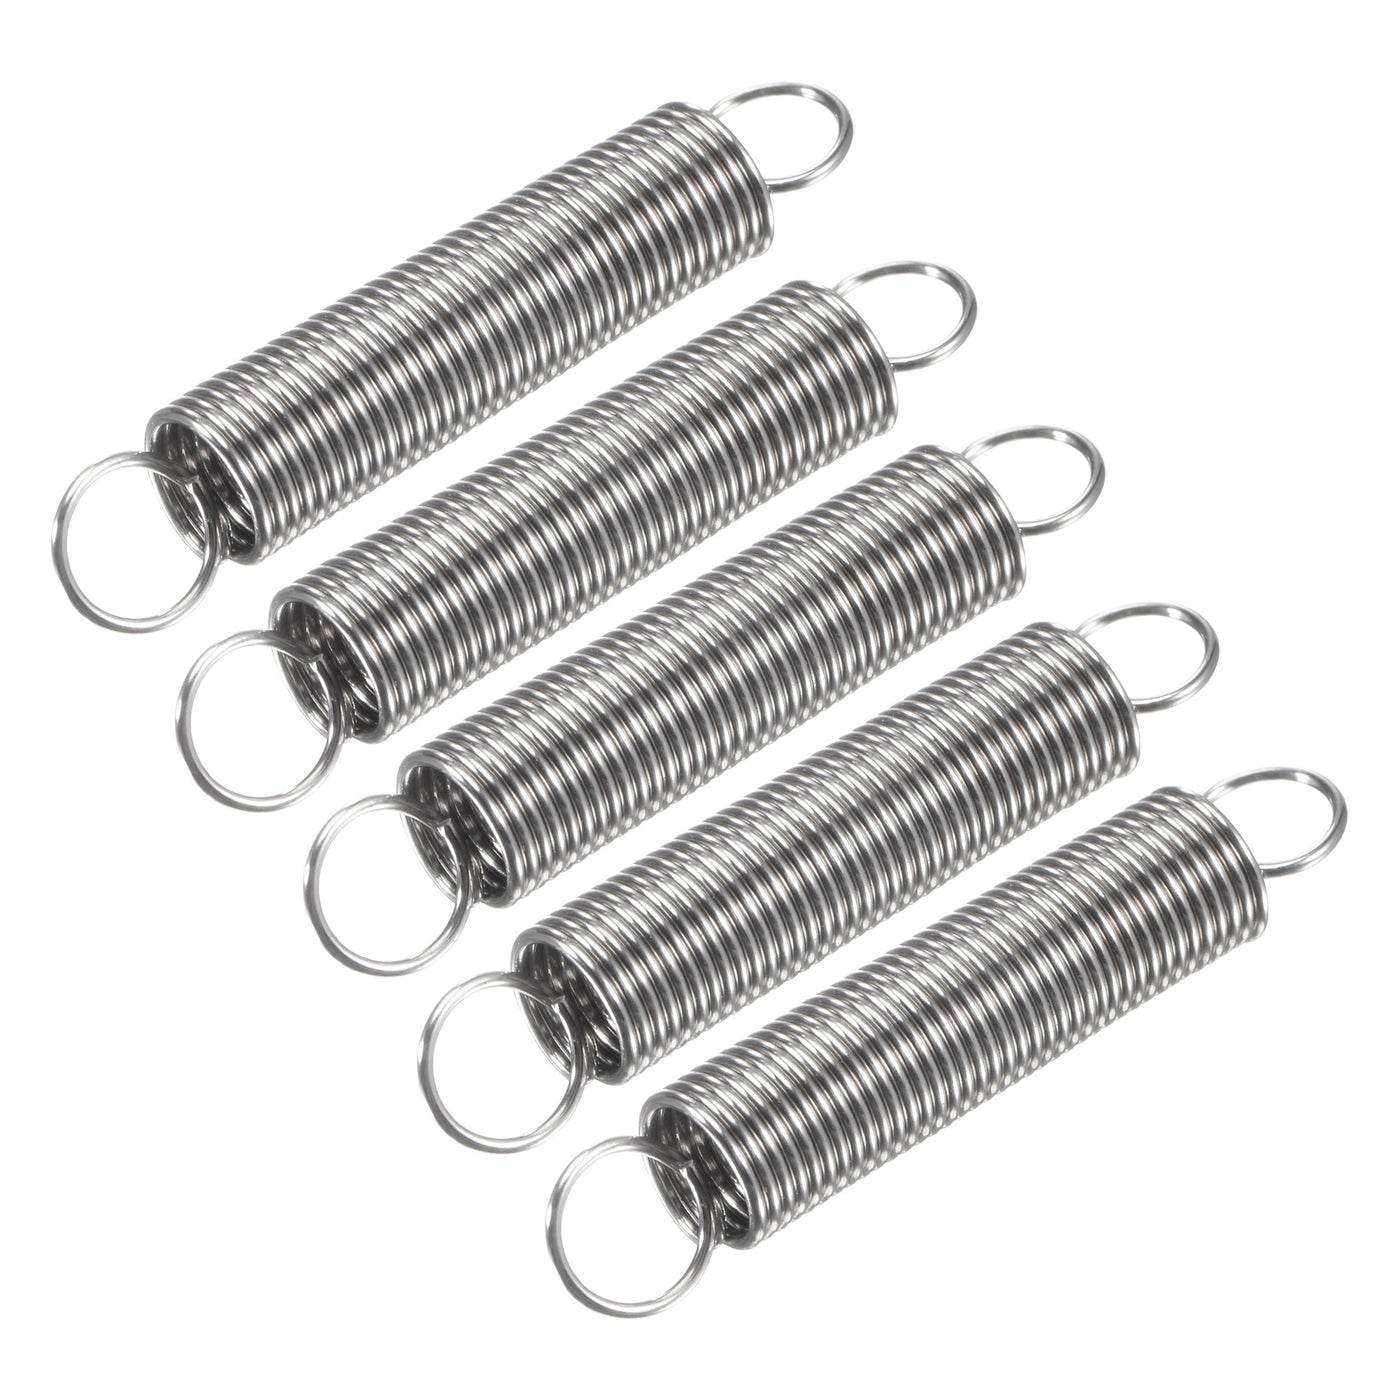 Uxcell Uxcell 0.8mmx8mmx70mm Extended Compression Spring,2.9Lbs Load Capacity,Silver,5pcs